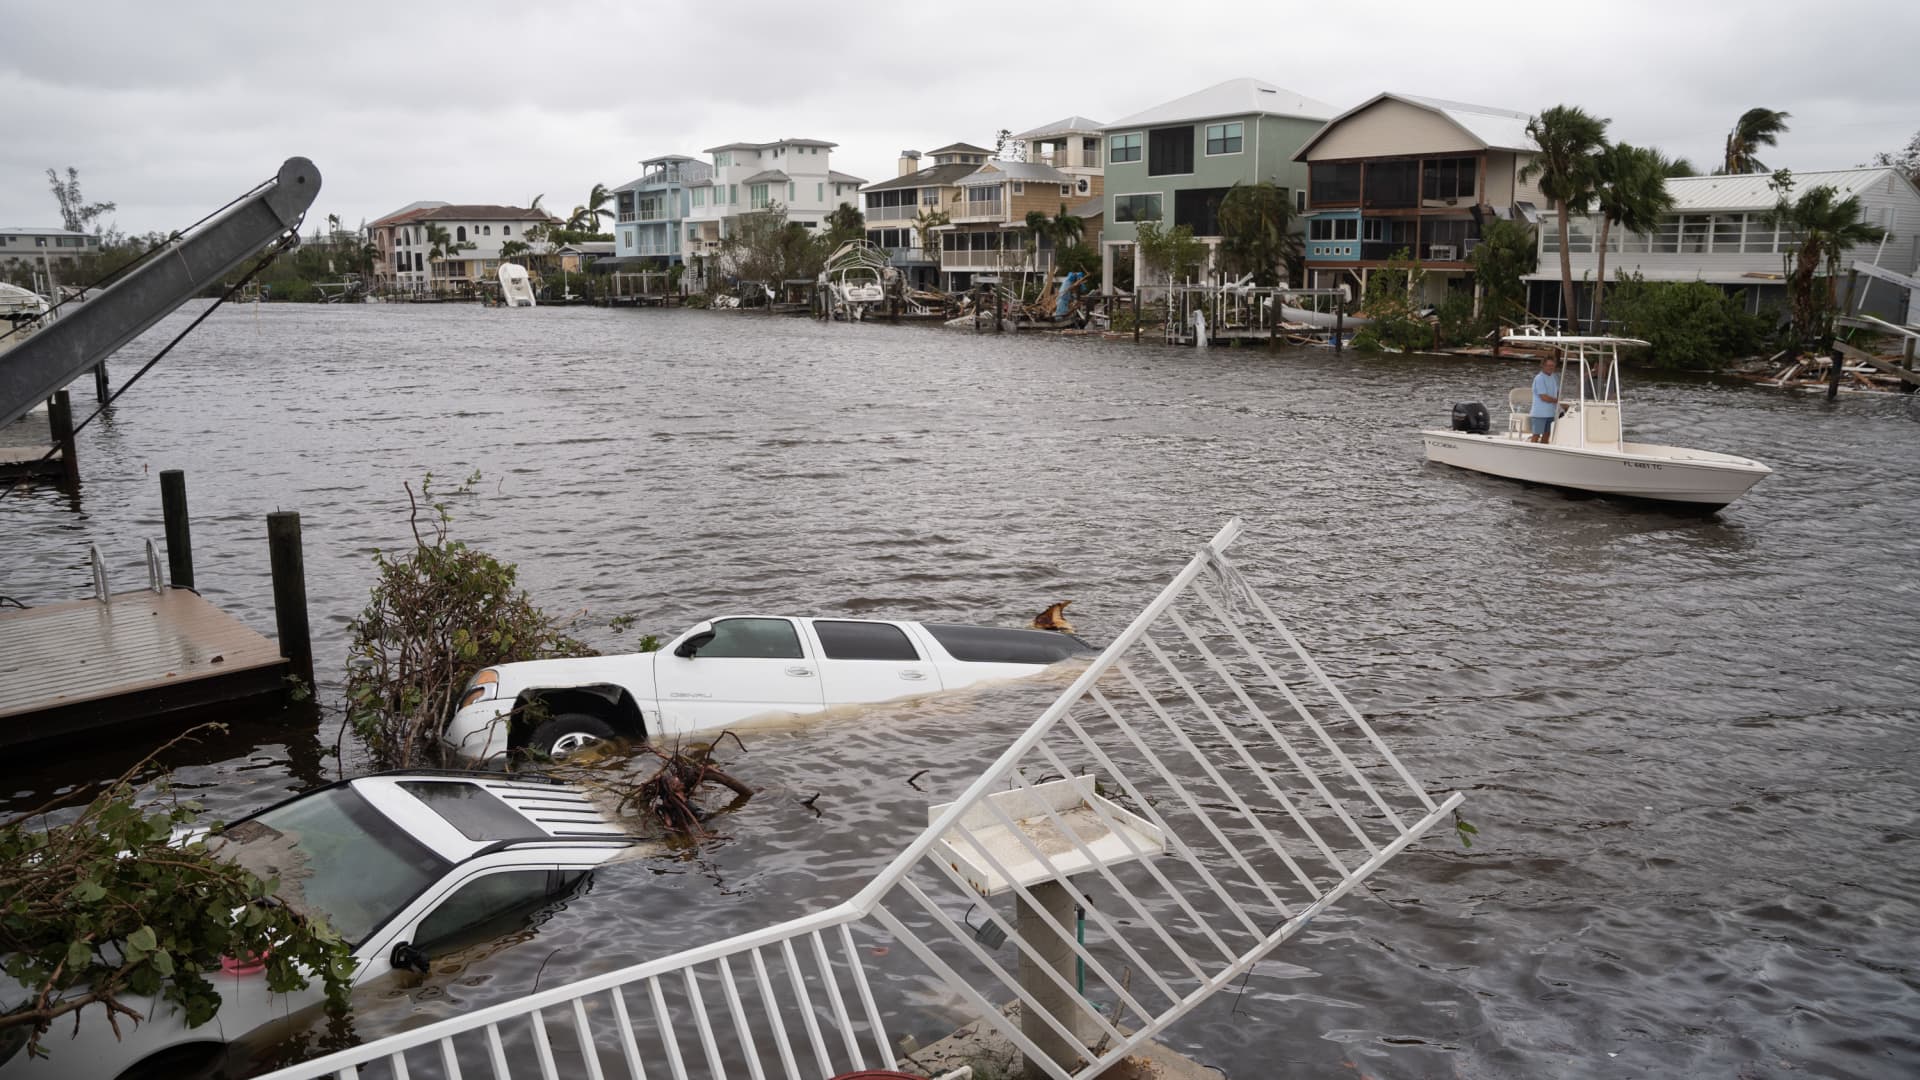 Vehicles float in the water after Hurricane Ian on September 29, 2022 in Bonita Springs, Florida. Hurricane Ian brought high winds, storm surge and rain to the area causing severe damage.